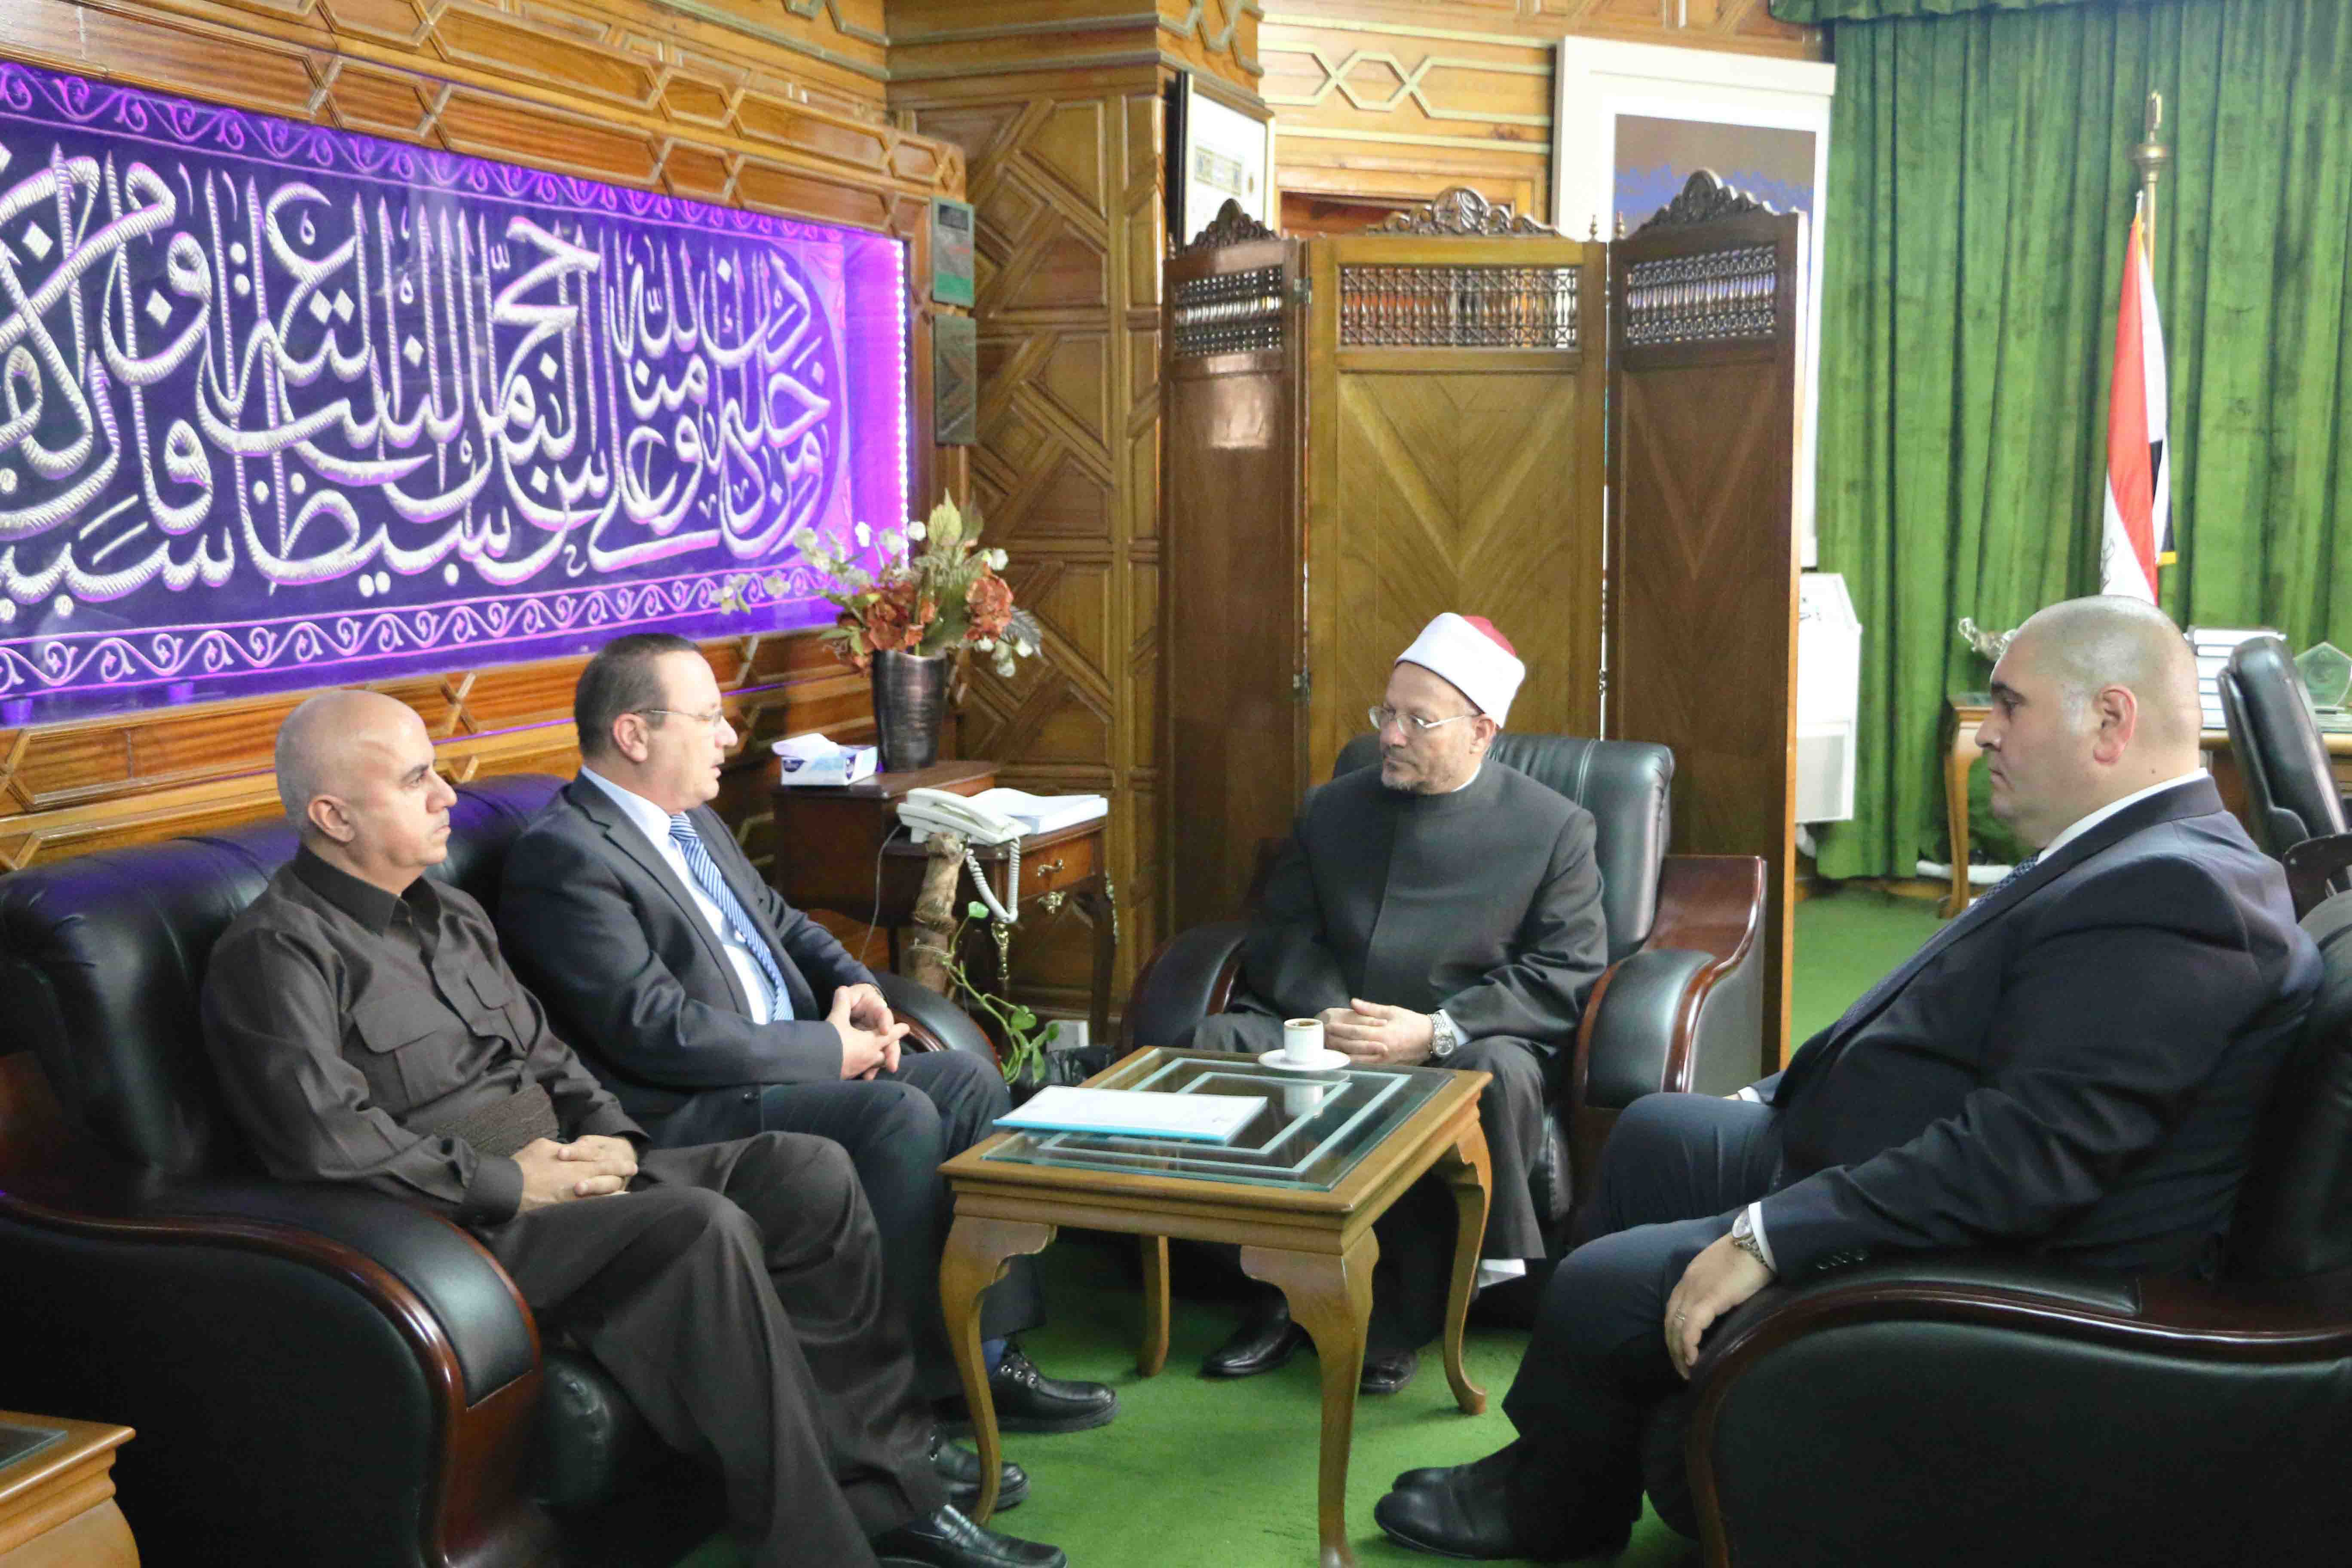 The Grand Mufti receives a delegation from the Kurdistan region of Iraq to promote cooperation in countering extremism